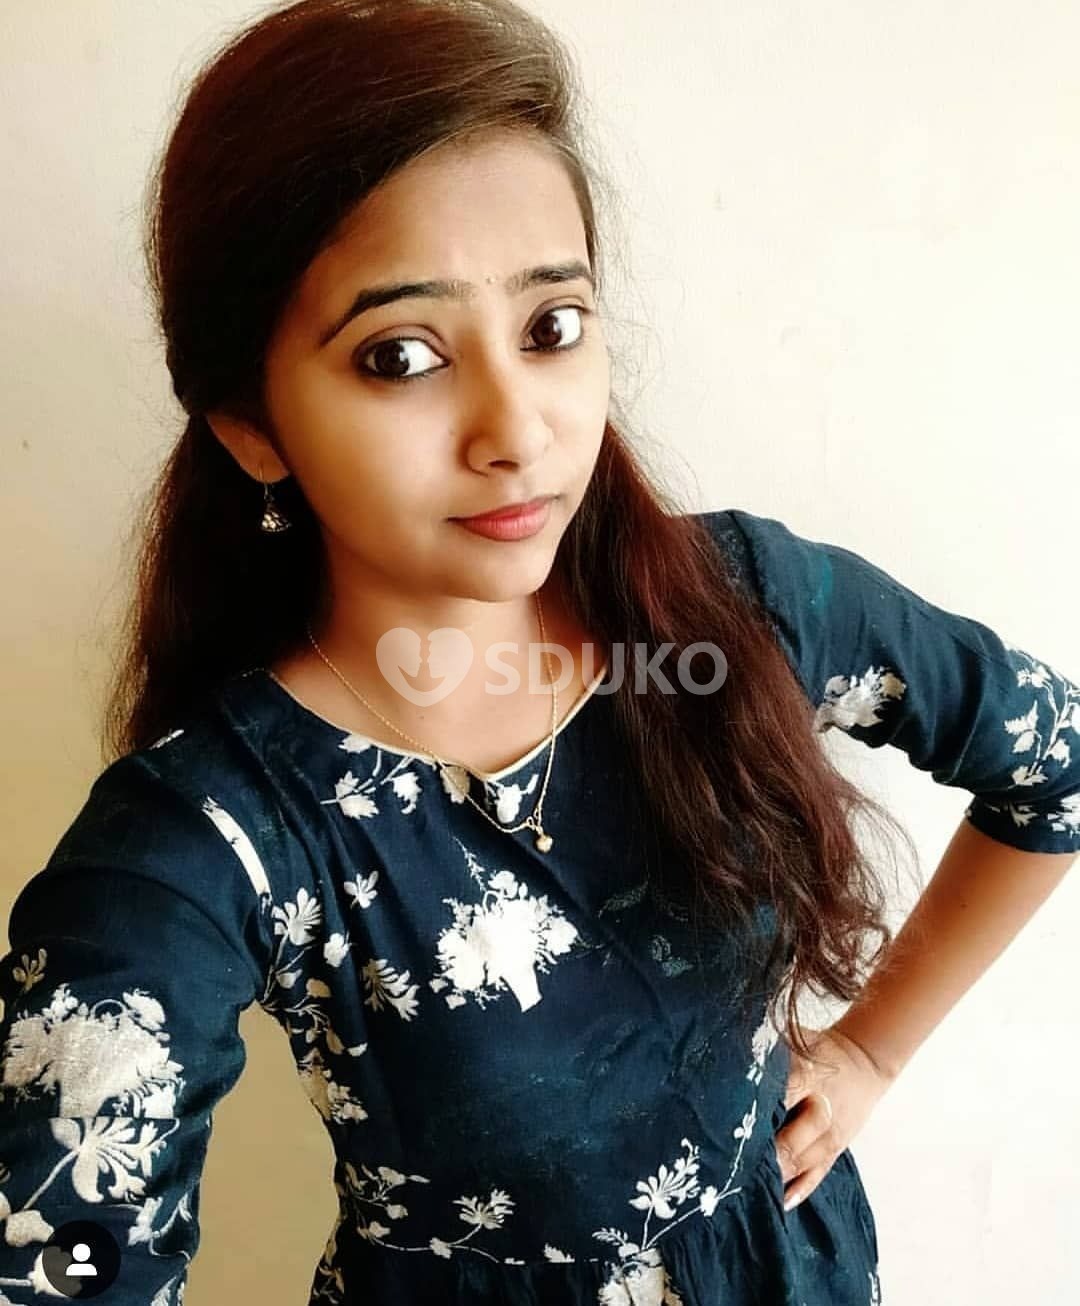 Coimbatore 100% genuine service college girls aunty Tamil girls all type sex full secure full safe 💯